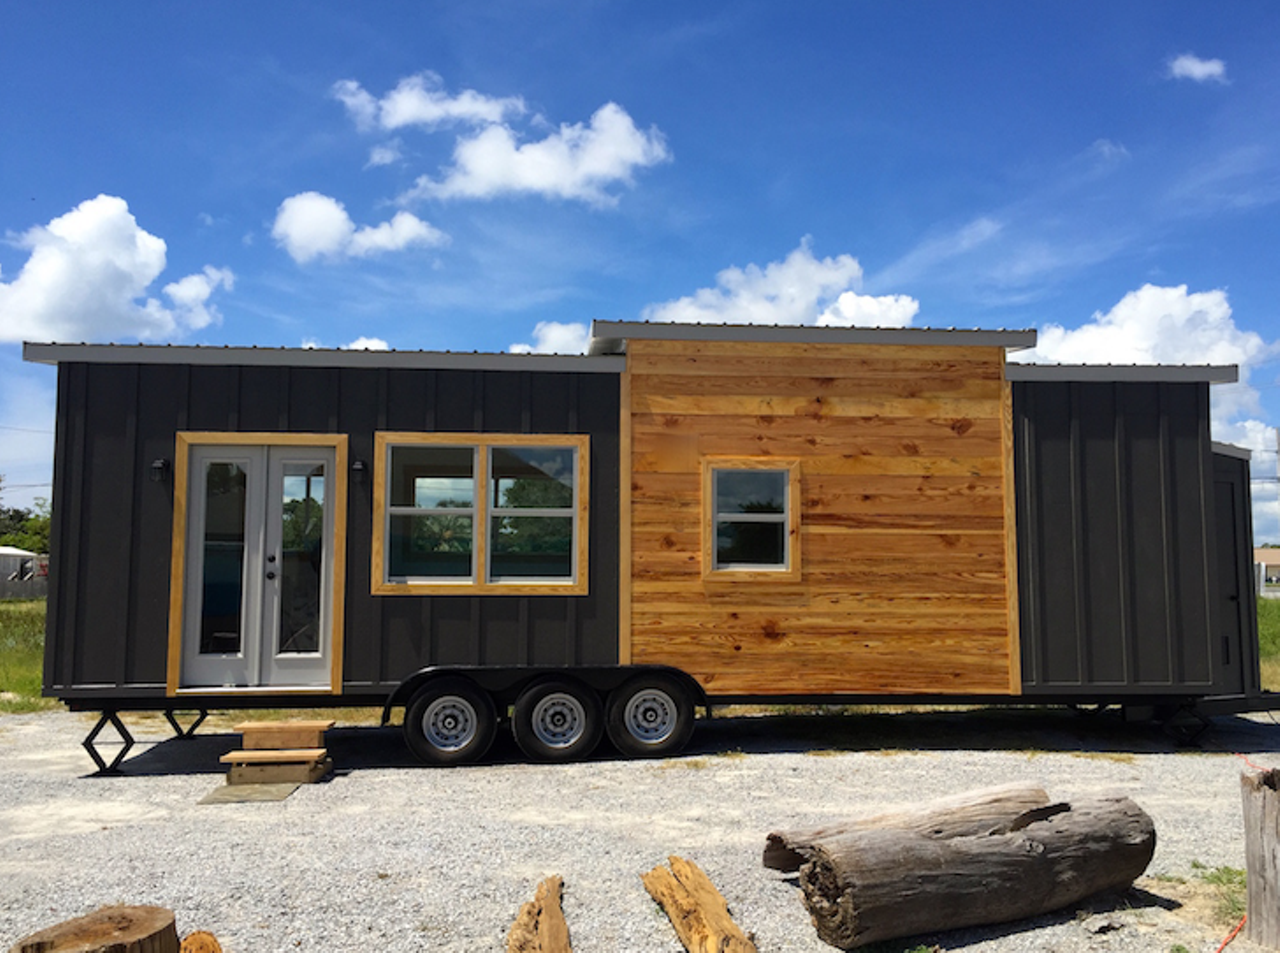 32' Irving Model
Location: Panama City
Price: $67,988
Size: 350 sq. ft.
This mini home is sleek and modern with a black interior and exterior design. It makes other mini homes look weak compared to it with its fierce design featuring two bedrooms that slays all around.